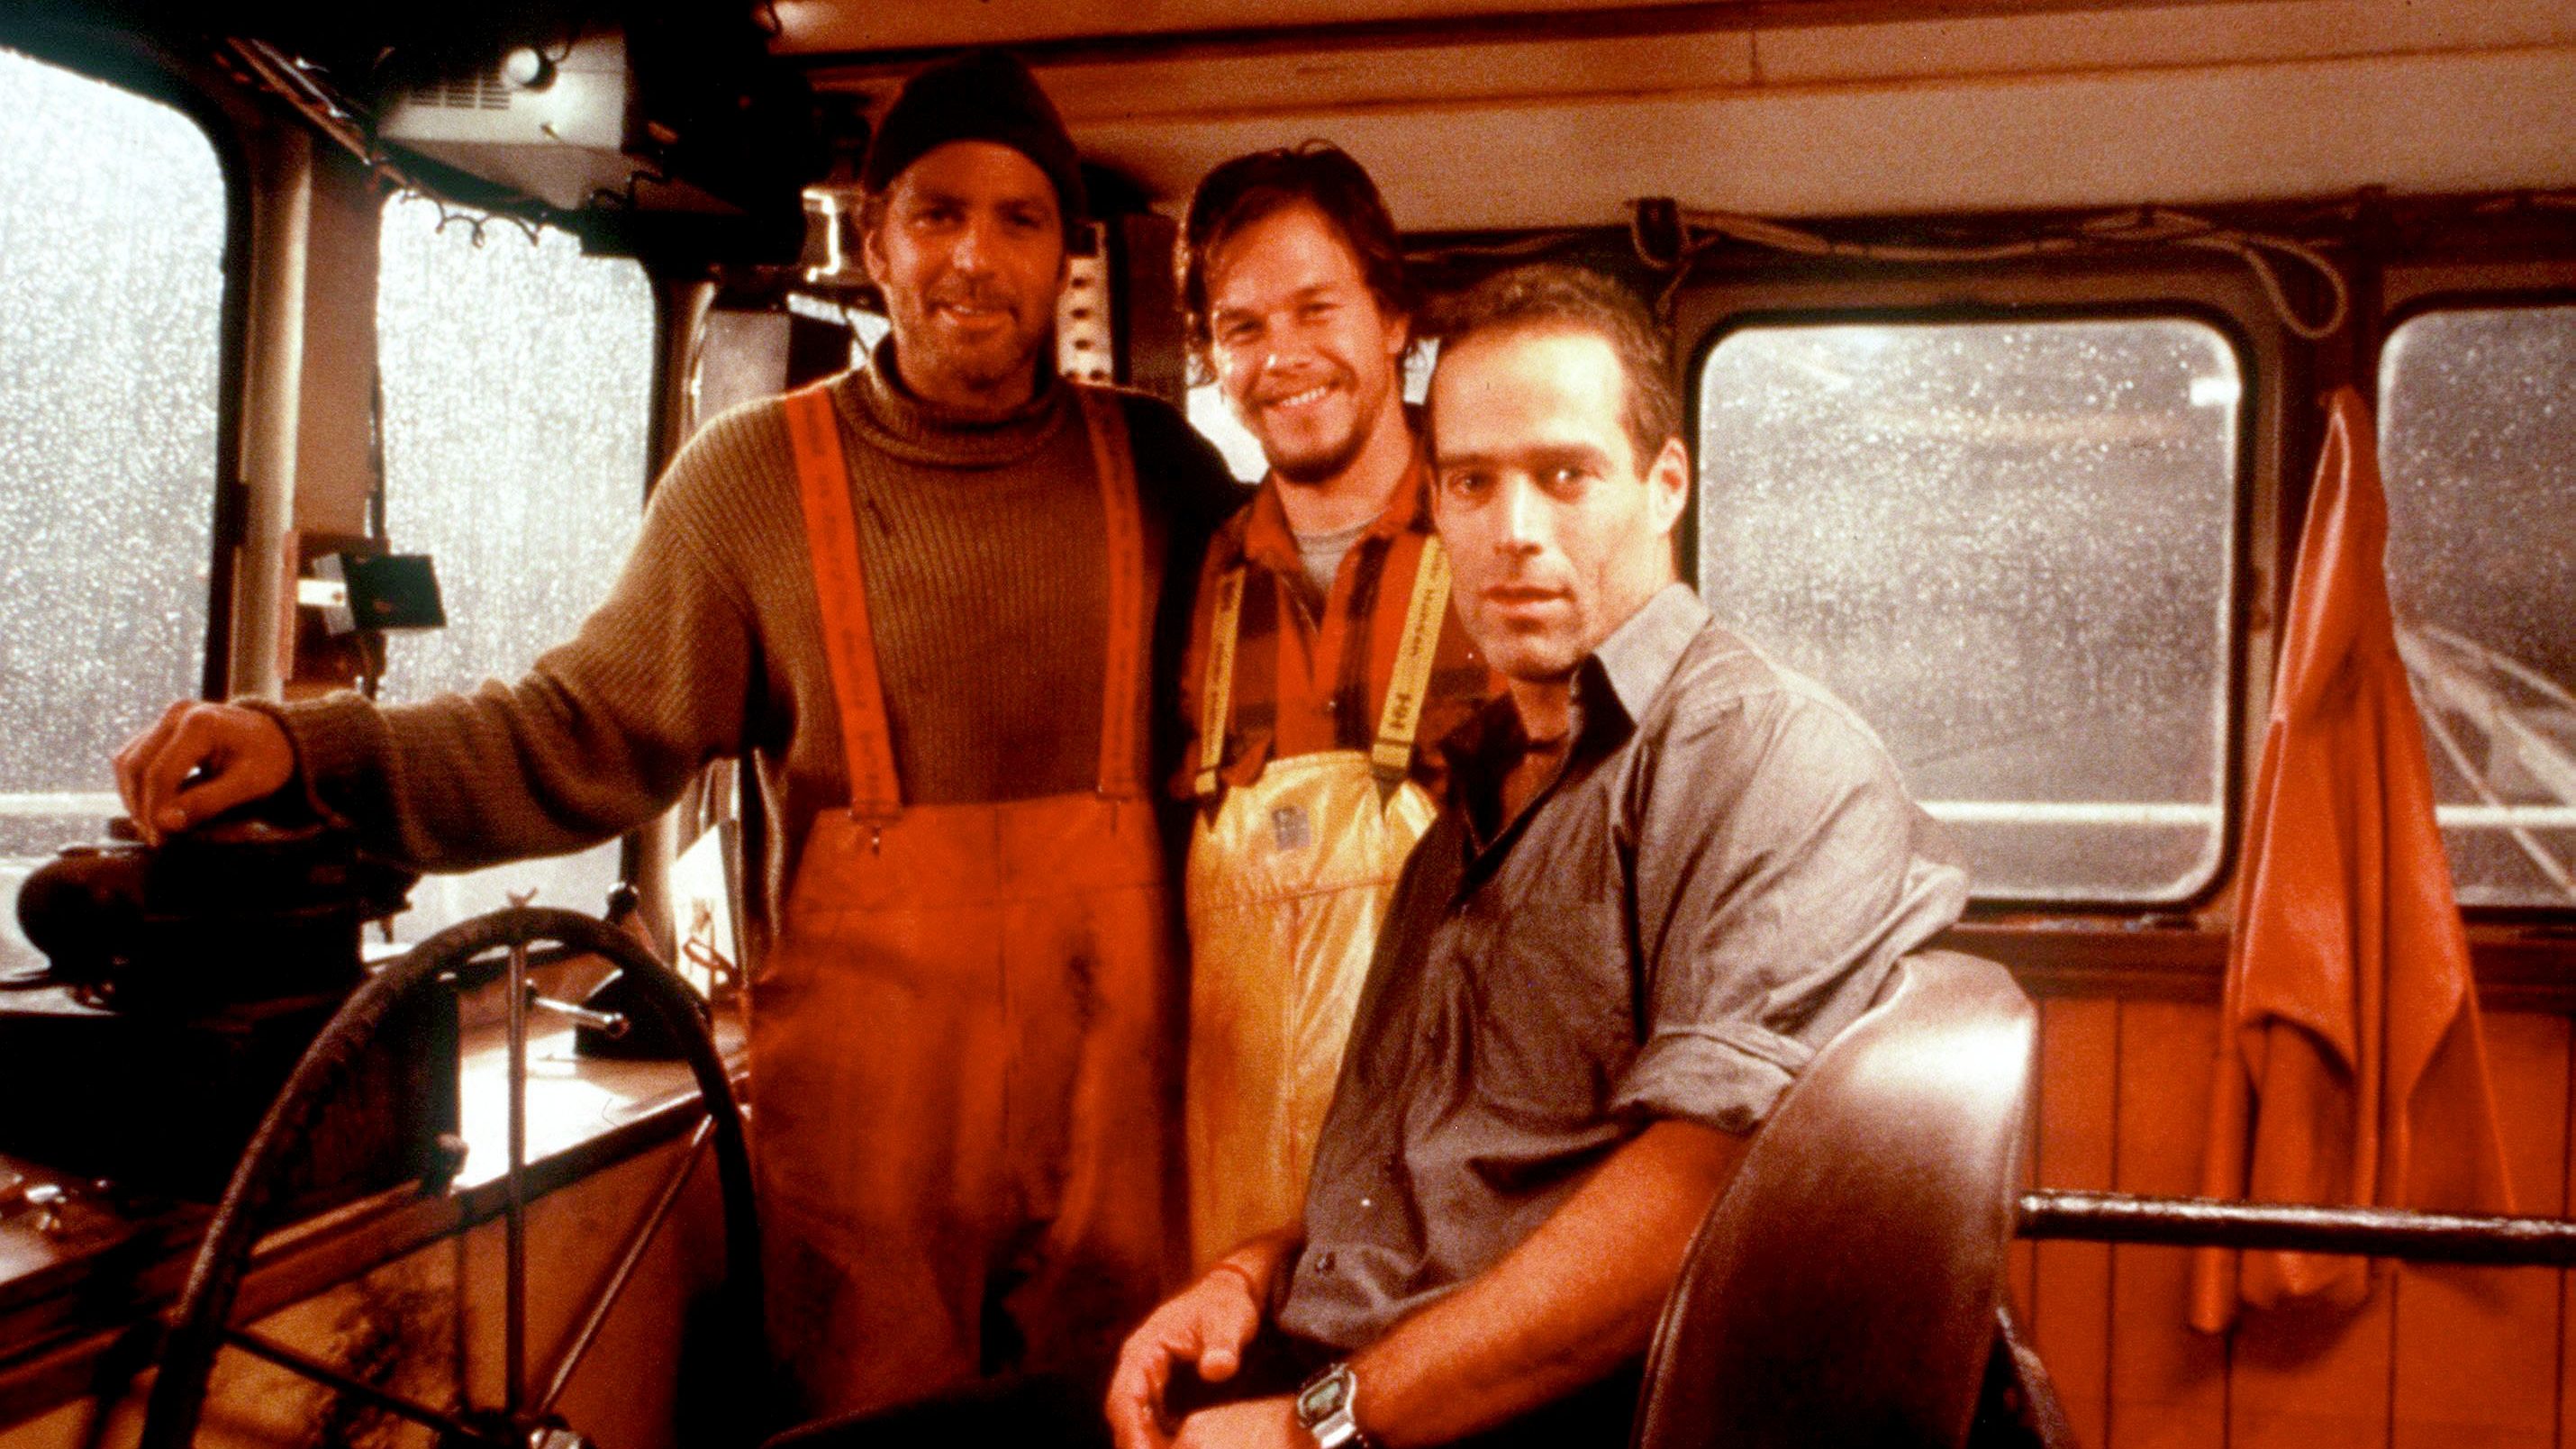 Sebastian Junger, Mark Wahlberg, George Clooney, The Perfect Storm, 2000